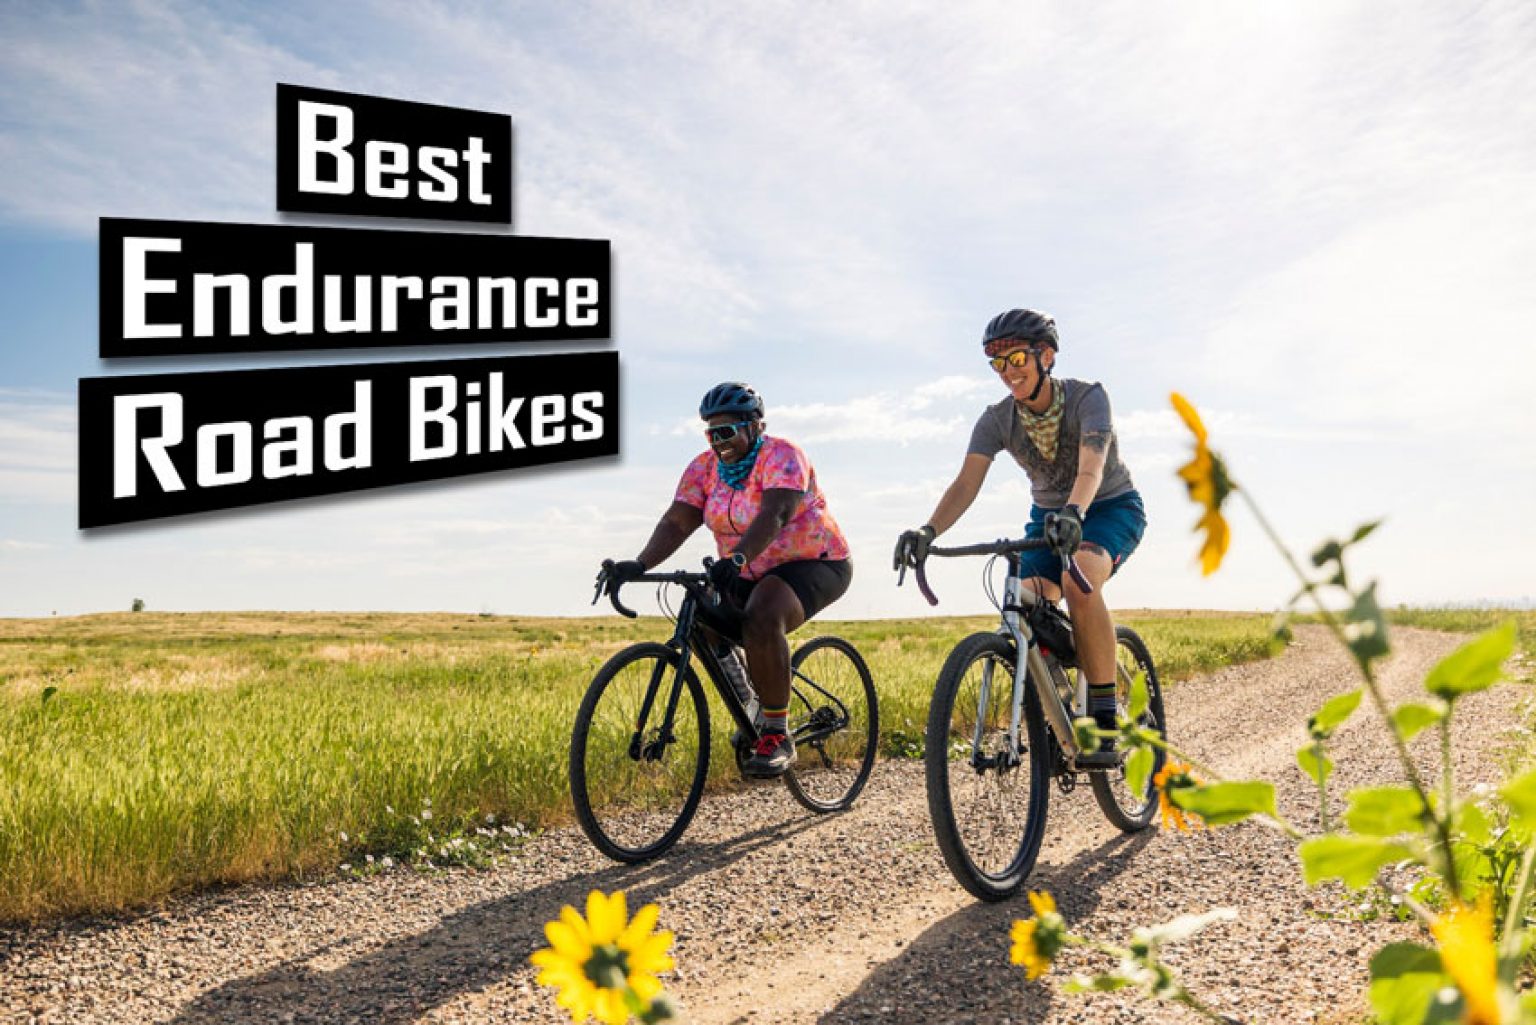 Best Endurance Road Bike Selection for Long Rides in 2023